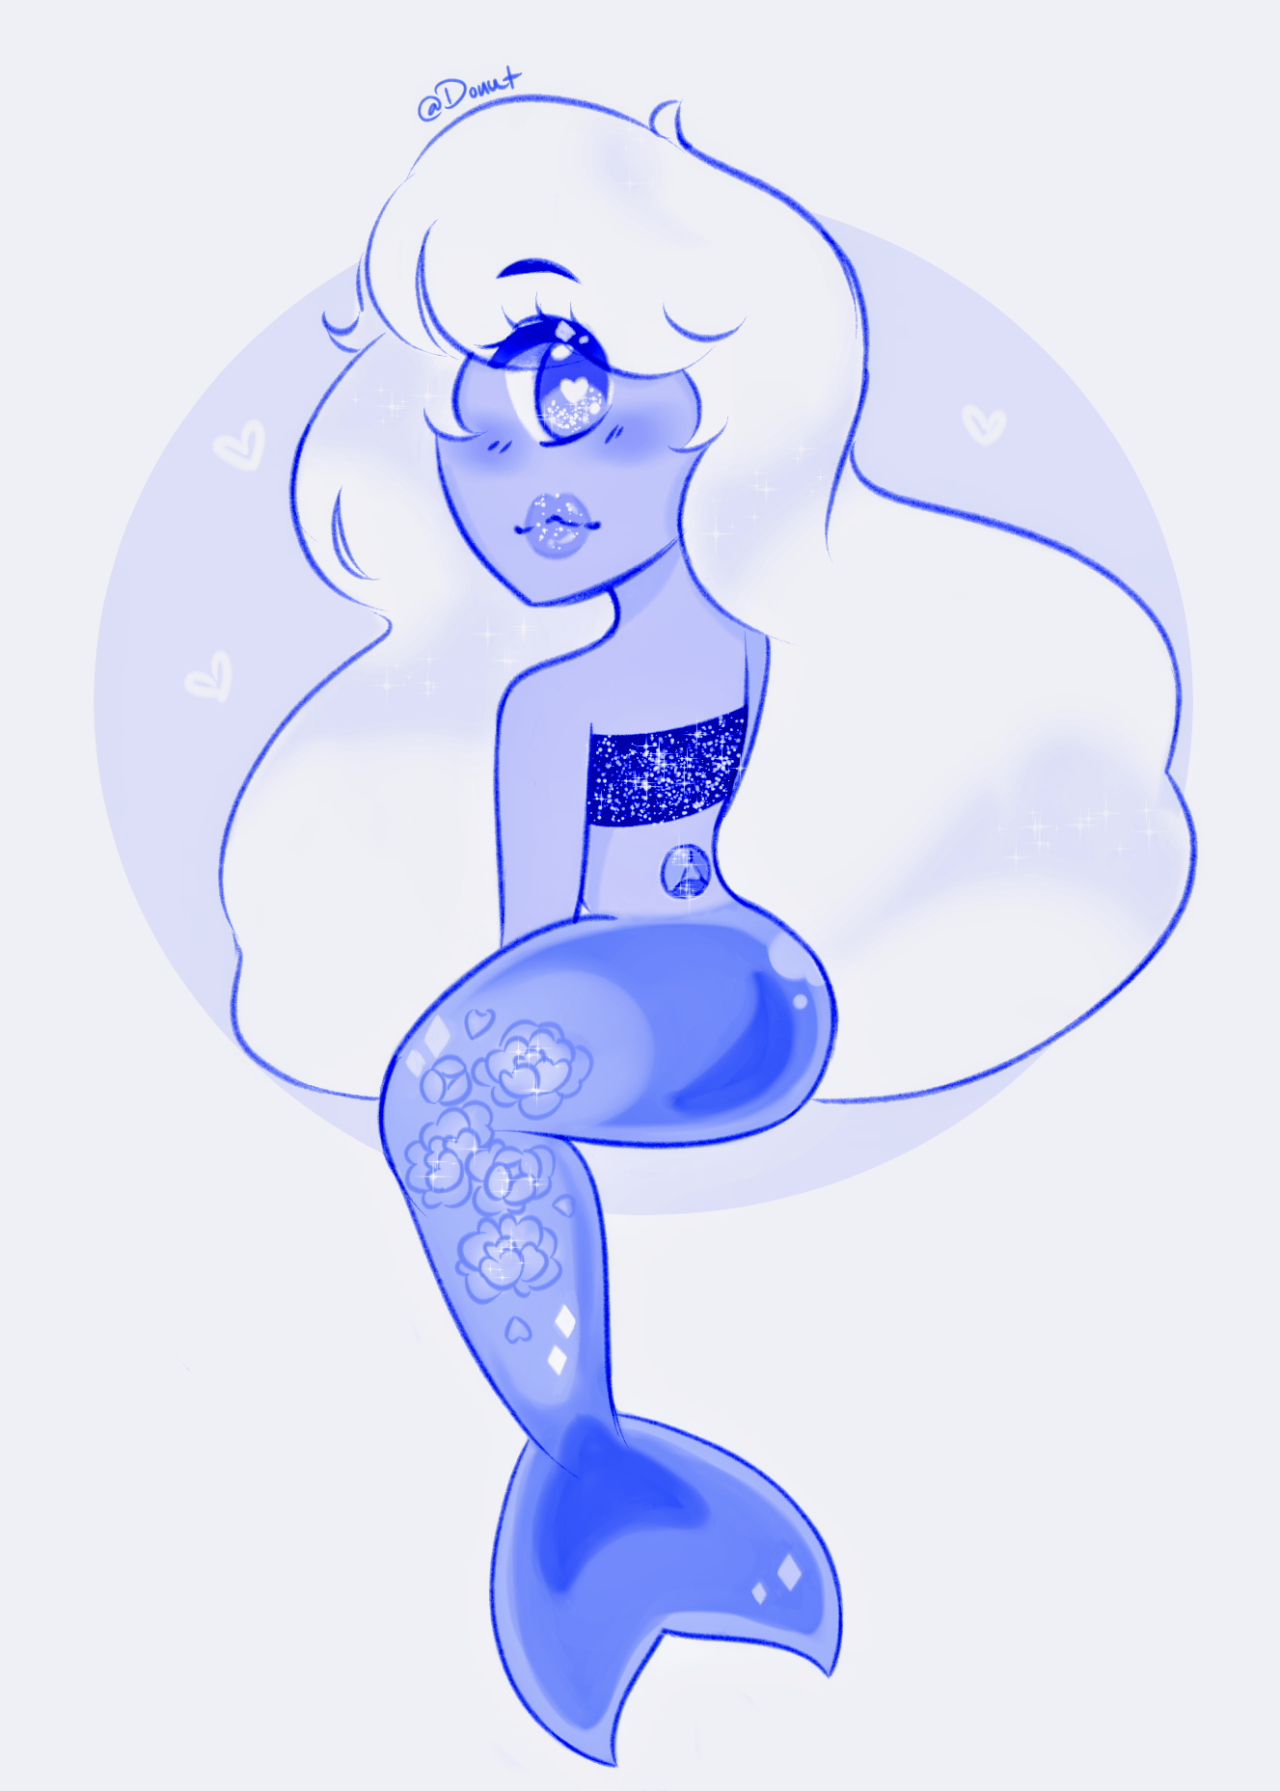 My Sapphire 💙 
She's a gem of the sea and loves the water, she prefers to be in it rather then on land.